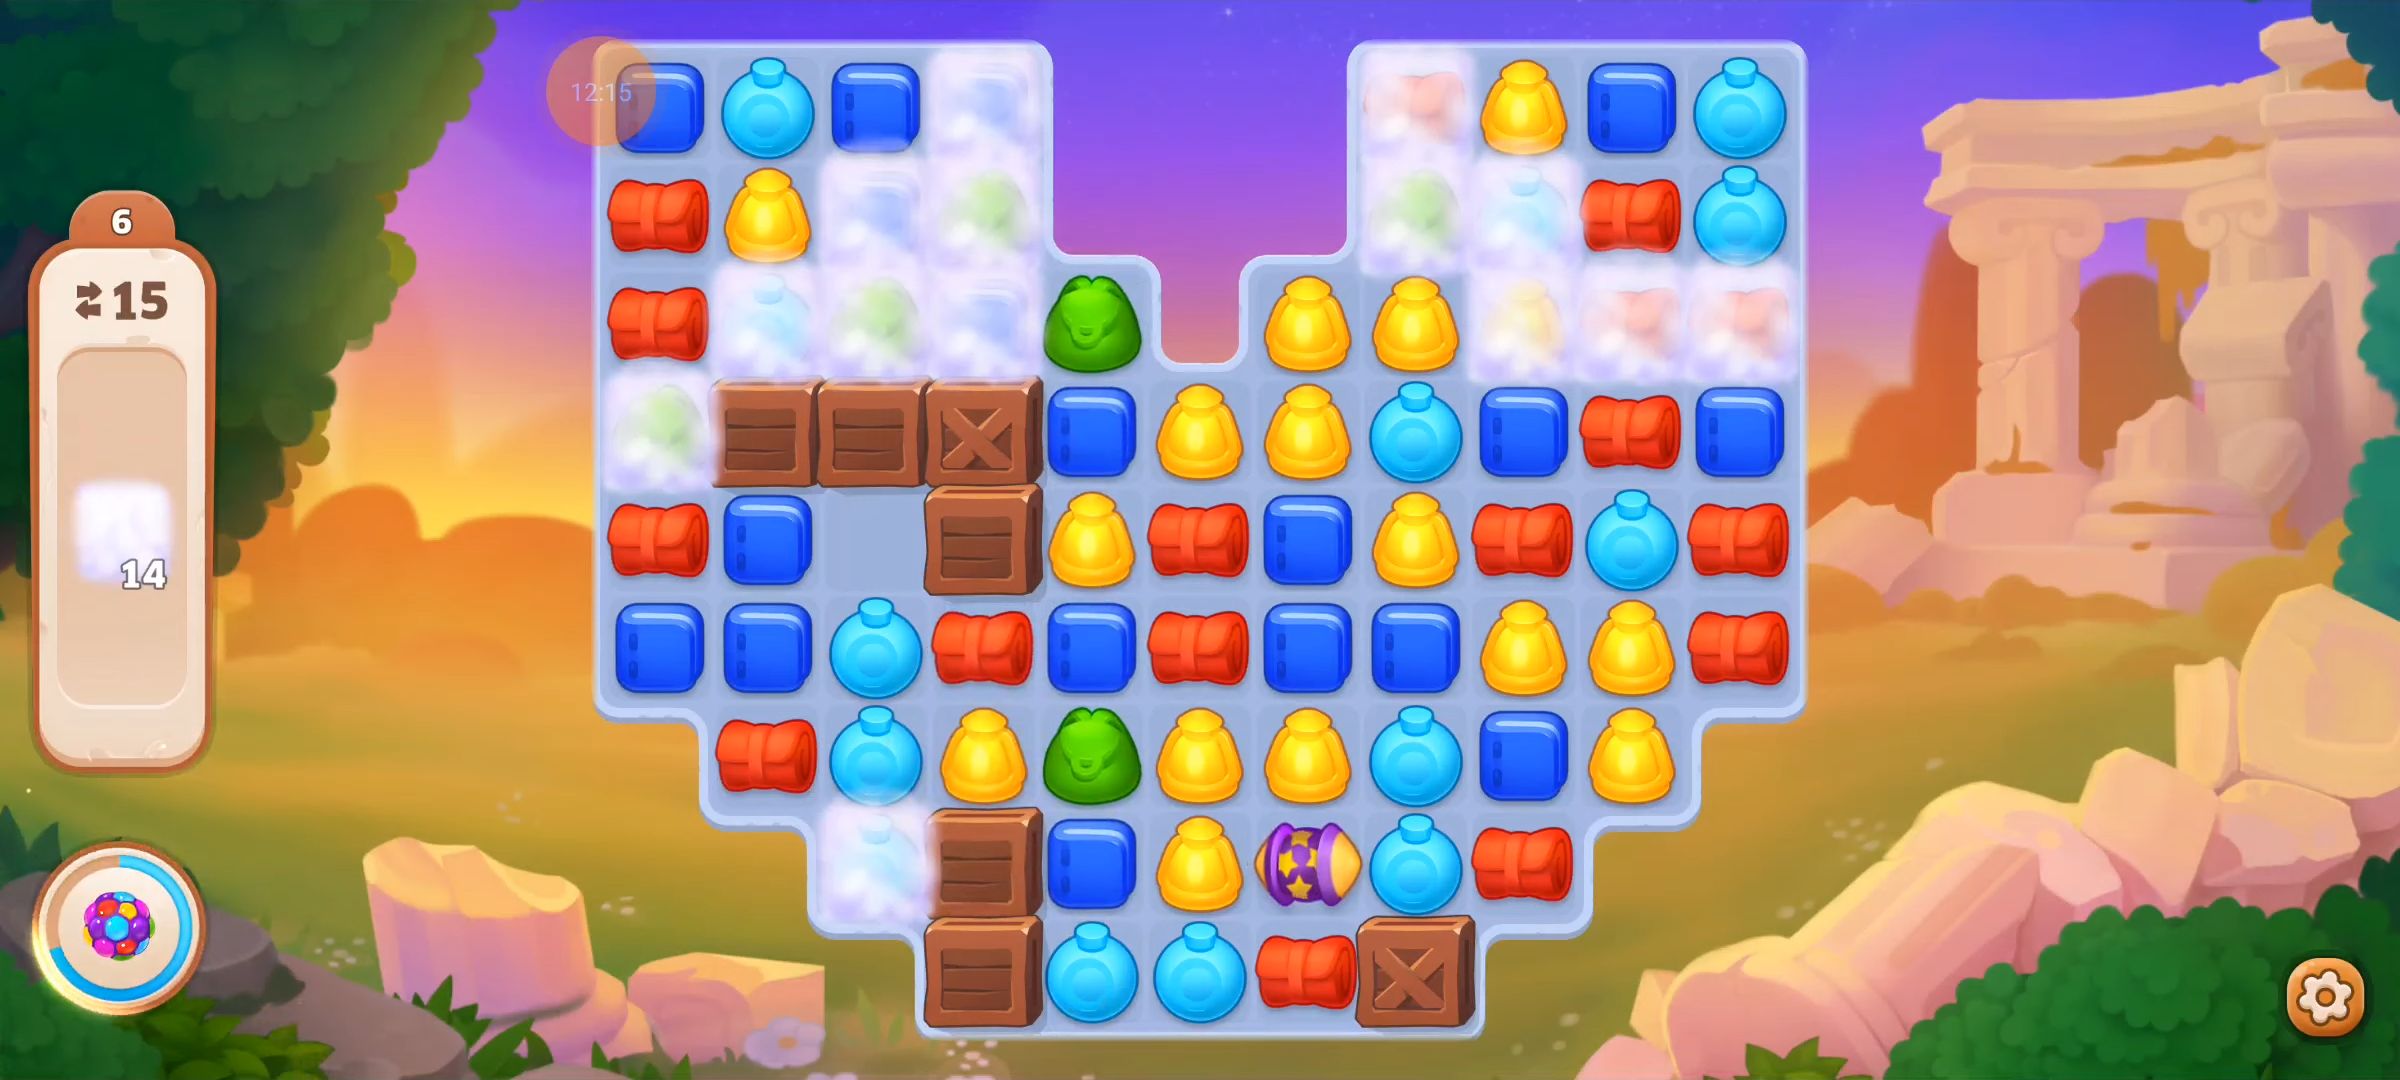 Gameplay of the Puzzle Odyssey: adventure game for Android phone or tablet.